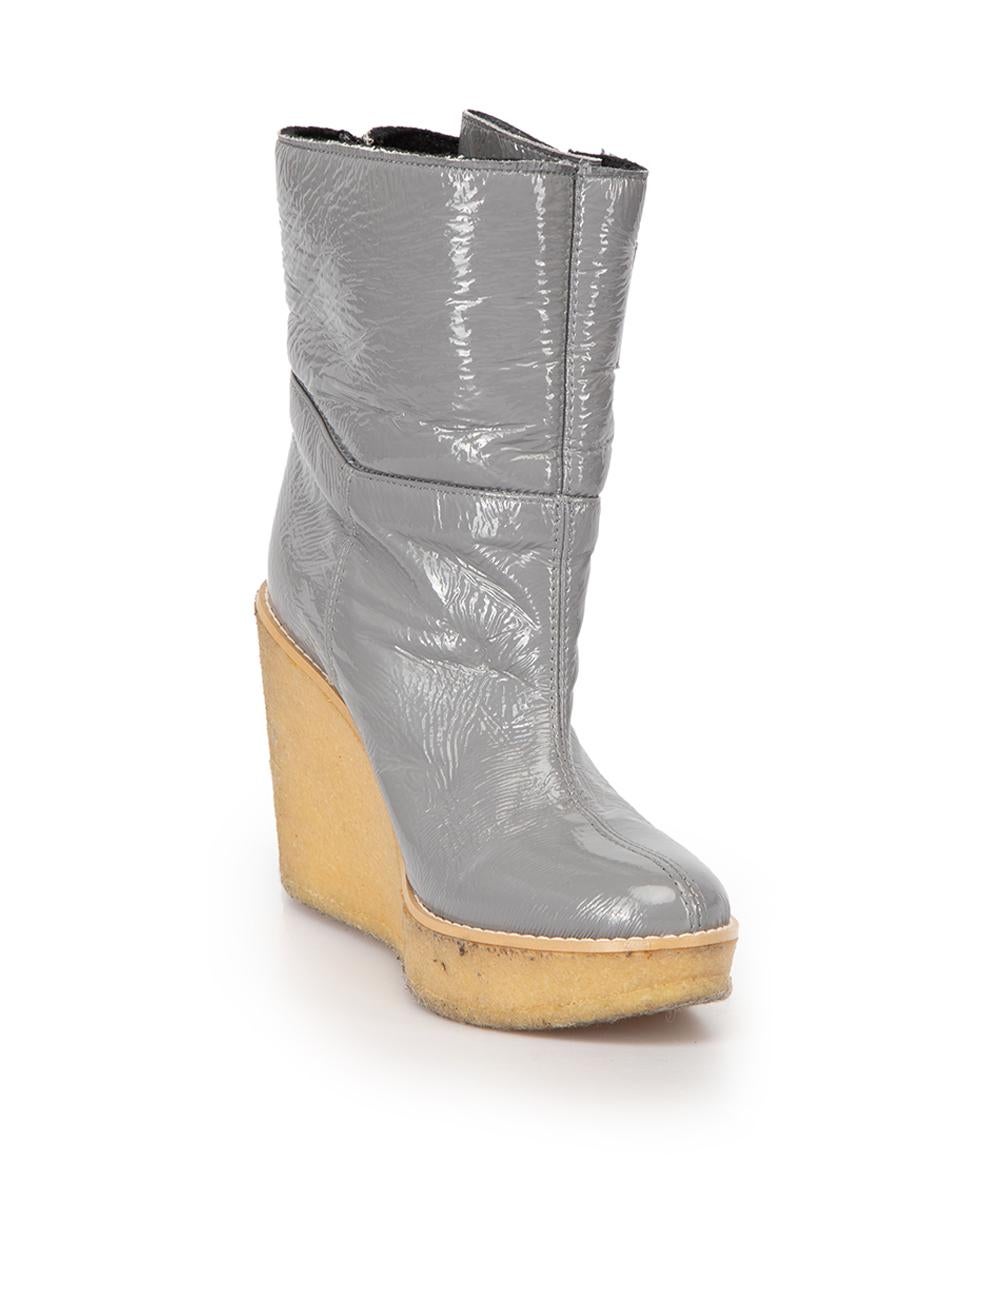 CONDITION is Good. Minor wear to boots is evident. Light wear to the rubber wedge sole with marks on both boots and small scuffs at both toes on this used Stella McCartney designer resale item. 



Details


Grey

Vegan patent leather

Ankle